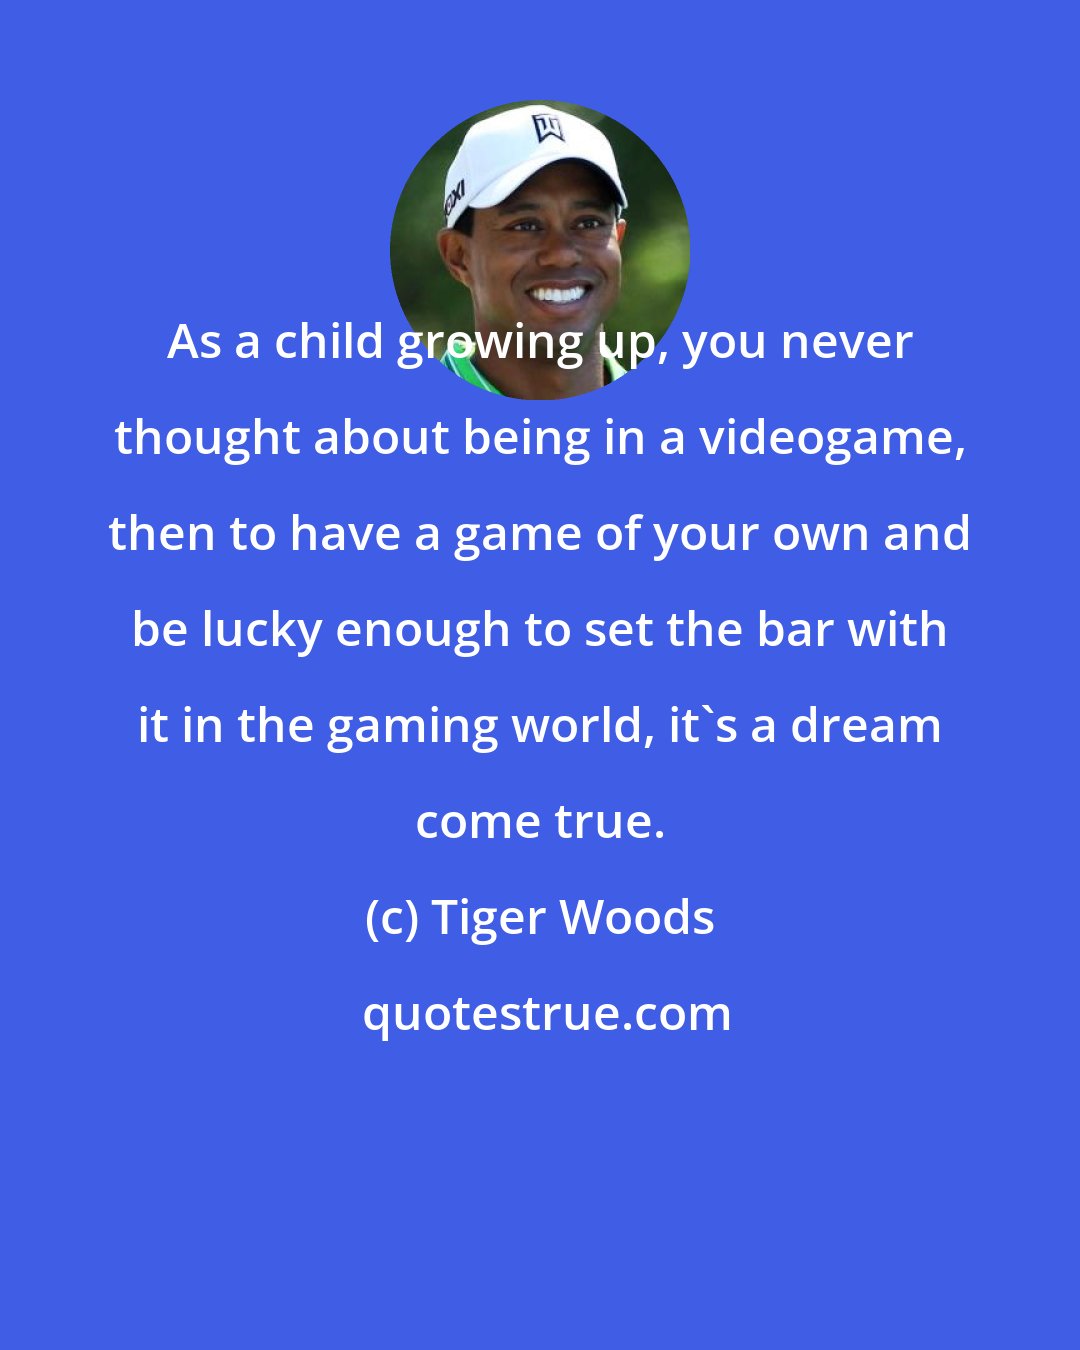 Tiger Woods: As a child growing up, you never thought about being in a videogame, then to have a game of your own and be lucky enough to set the bar with it in the gaming world, it's a dream come true.